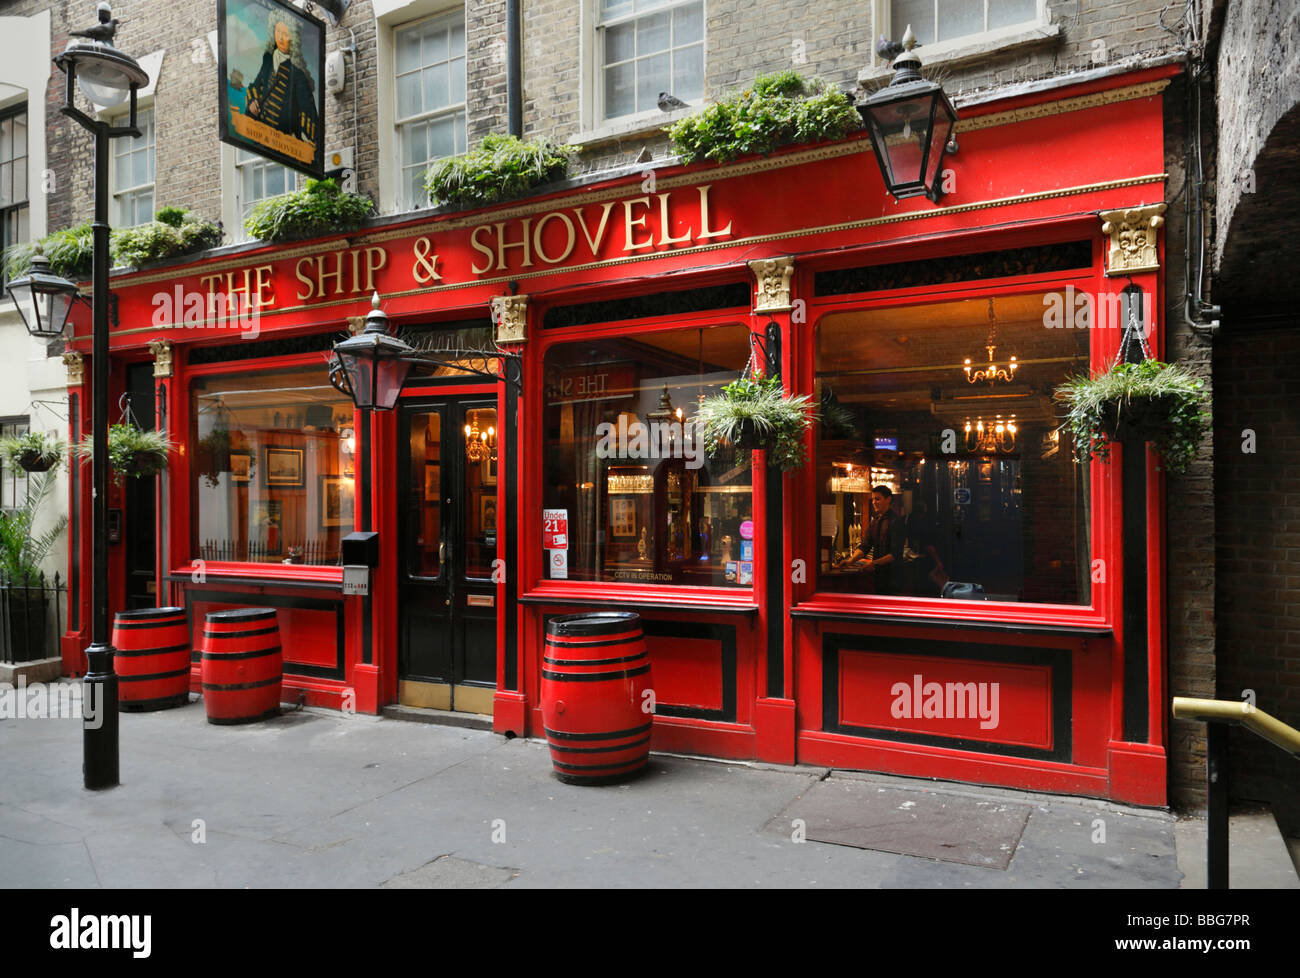 The Ship and Shovell public house. Craven Passage, Westminster, London, England, UK. Stock Photo